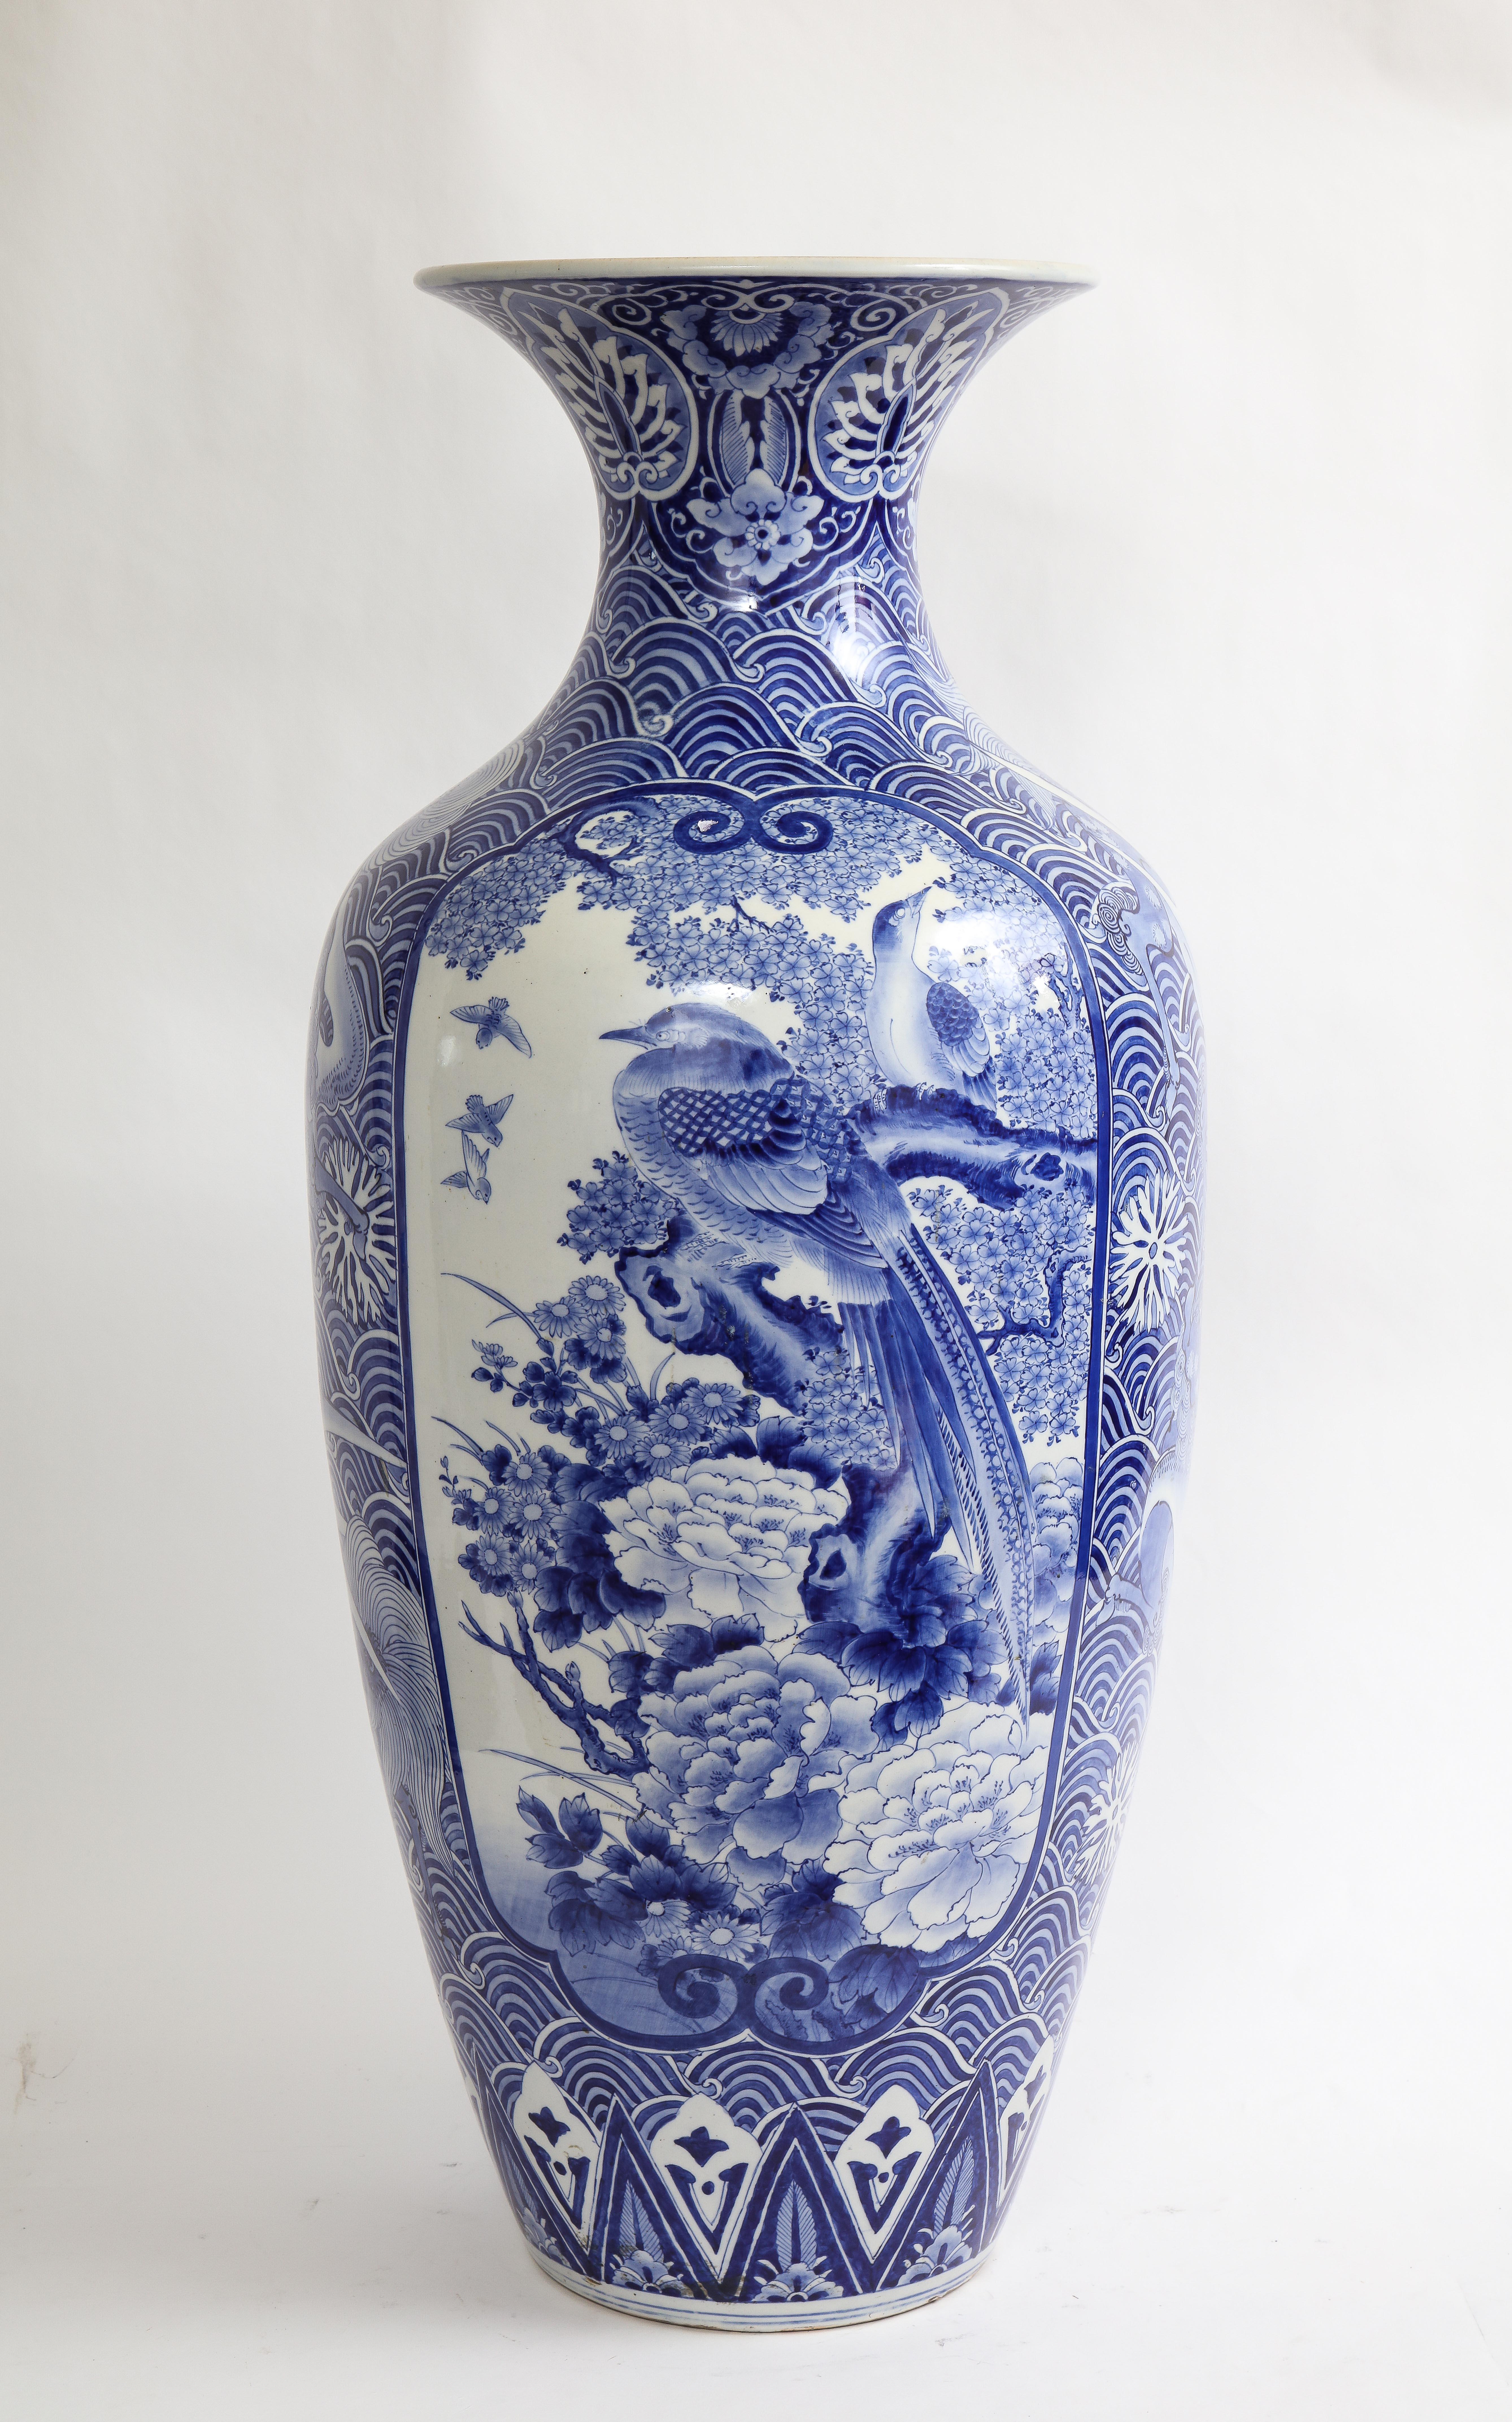 A Palace Size Japanese Meiji Period (1868-1912) Blue and White Vase with Phoenix Decoration. This vase is absolutely beautiful with an incredible array of hand-painted blue decorations. Either side of the vase consists of large cartouche panels with